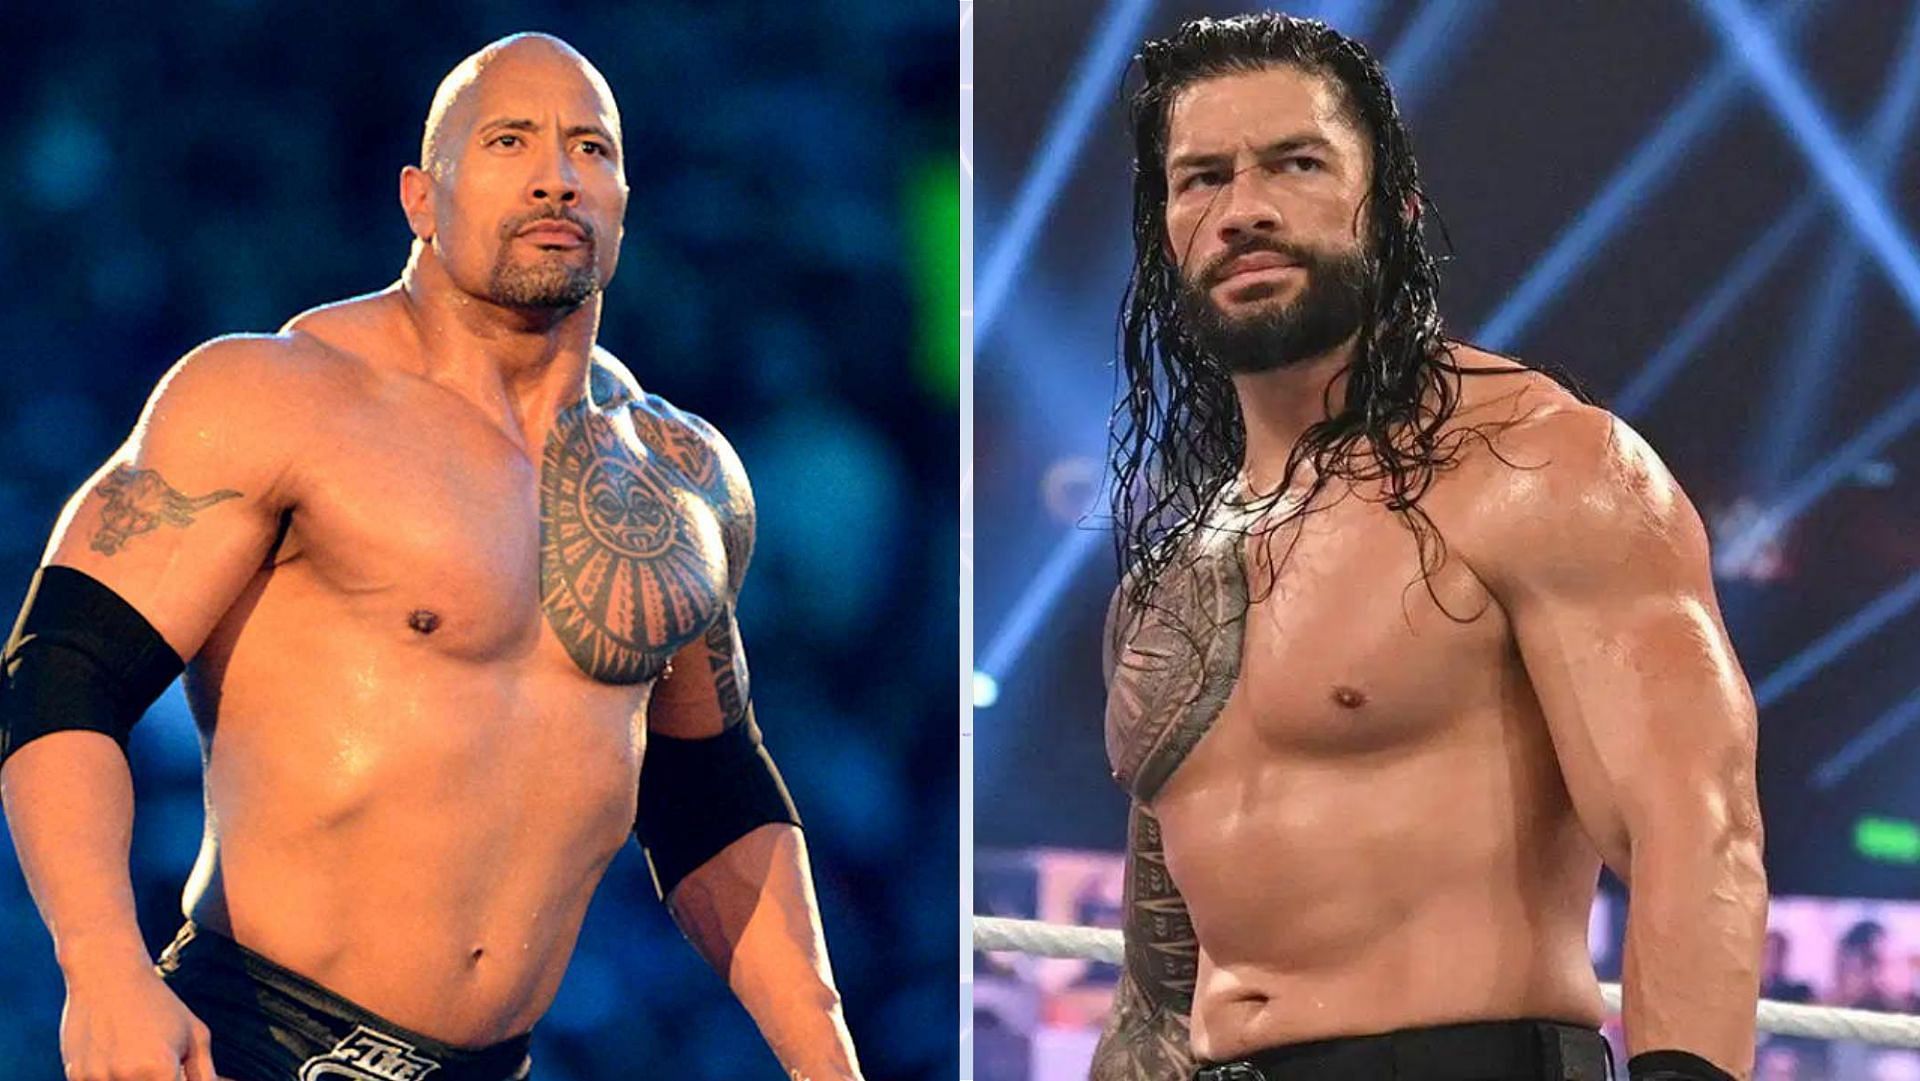 Wwe Boser Xxx Video - WWE Fast and Furious: 6 WWE stars who've featured in the Fast & Furious  franchise